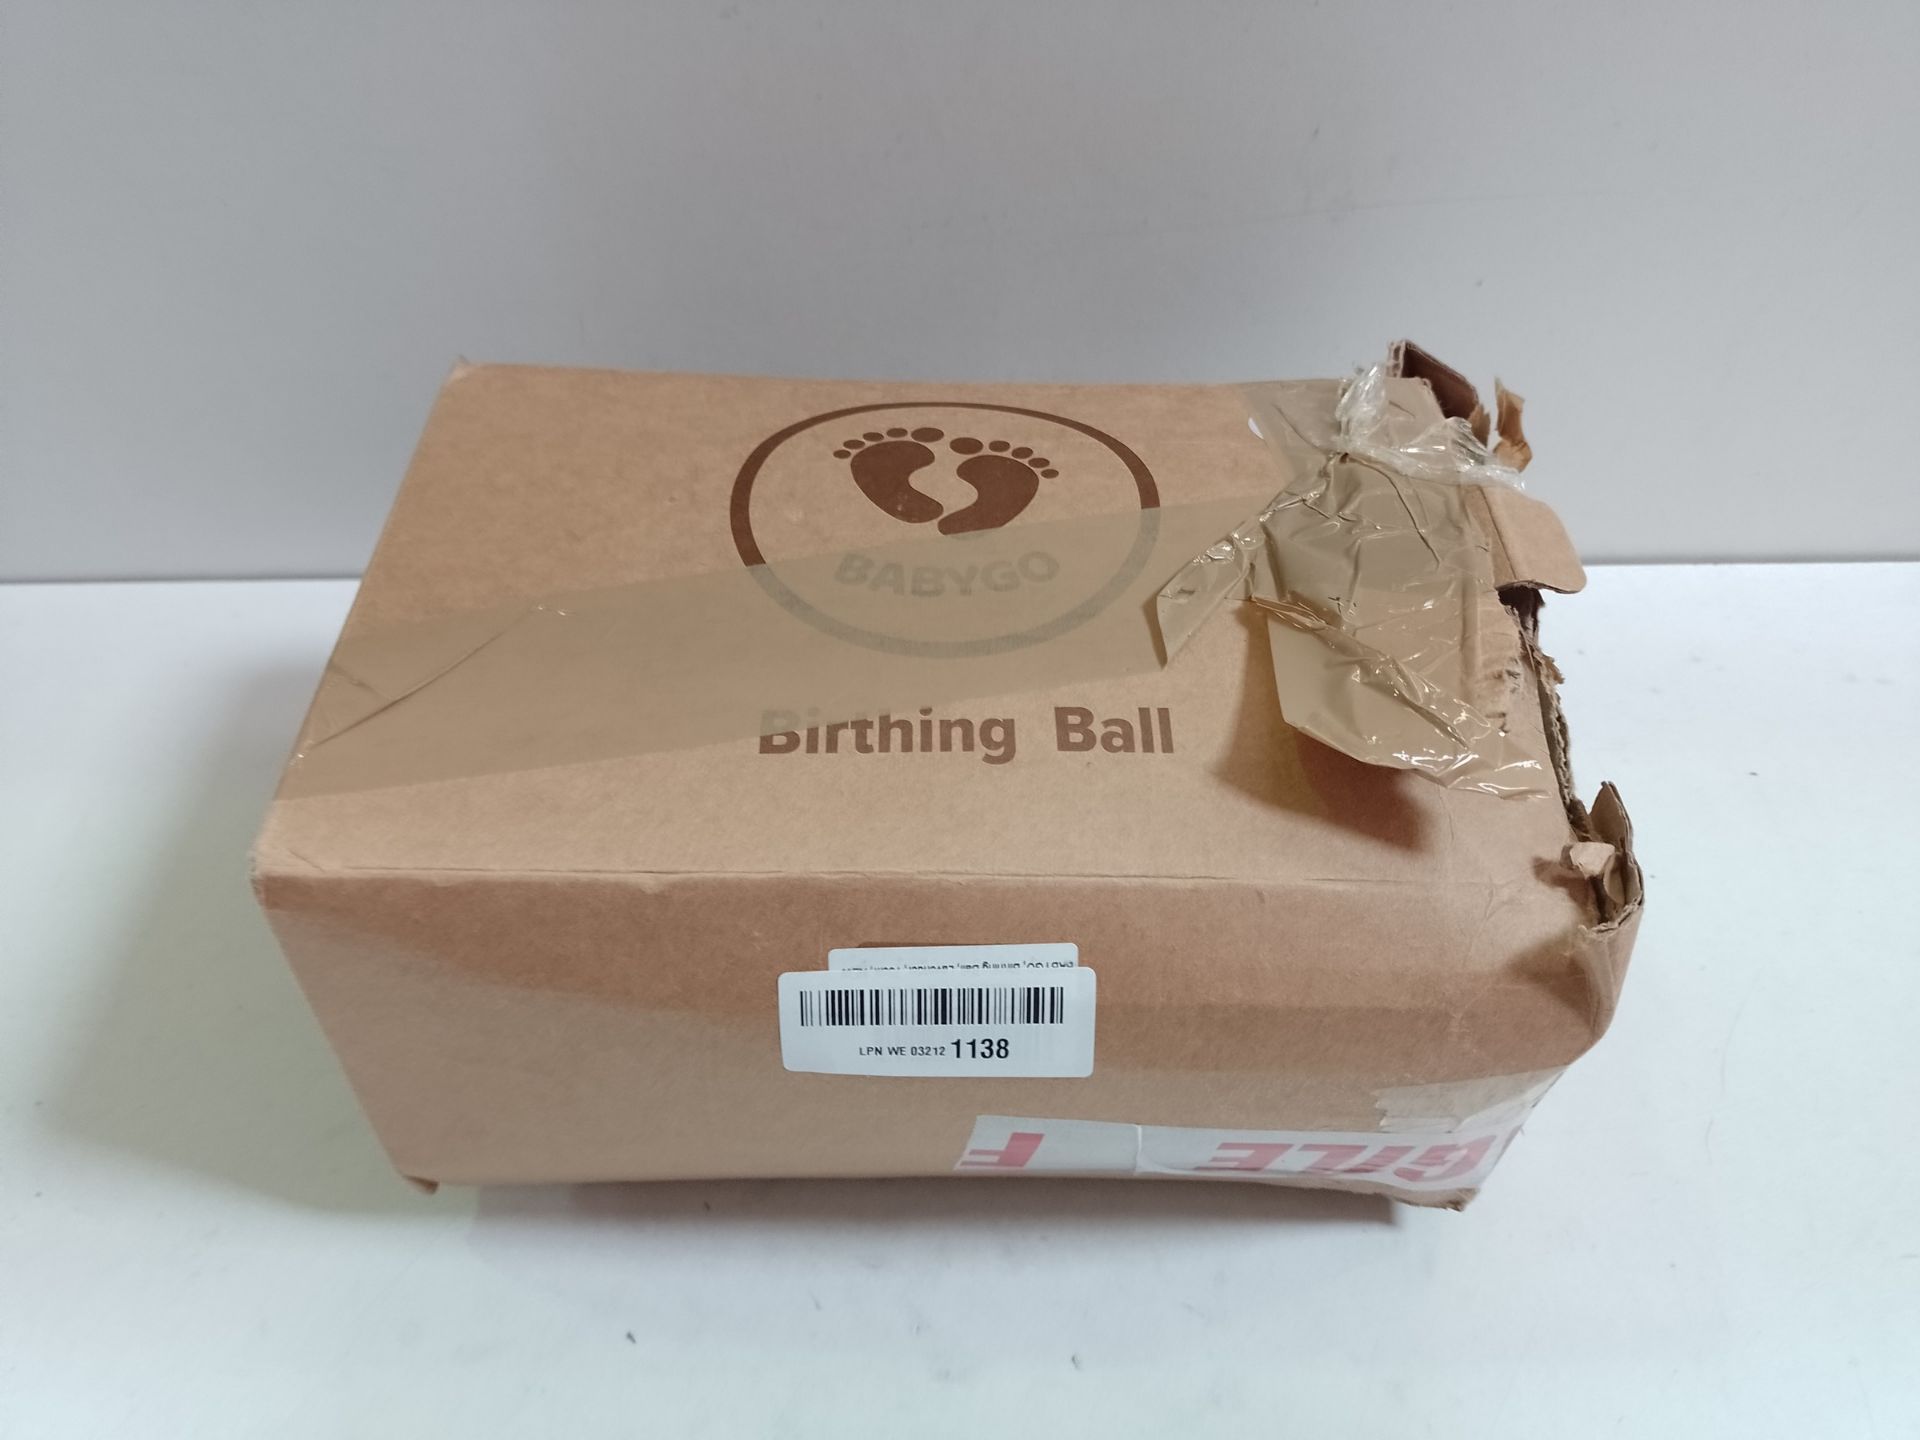 RRP £15.83 BABYGO Birthing Ball For Pregnancy Maternity Labour - Image 2 of 2